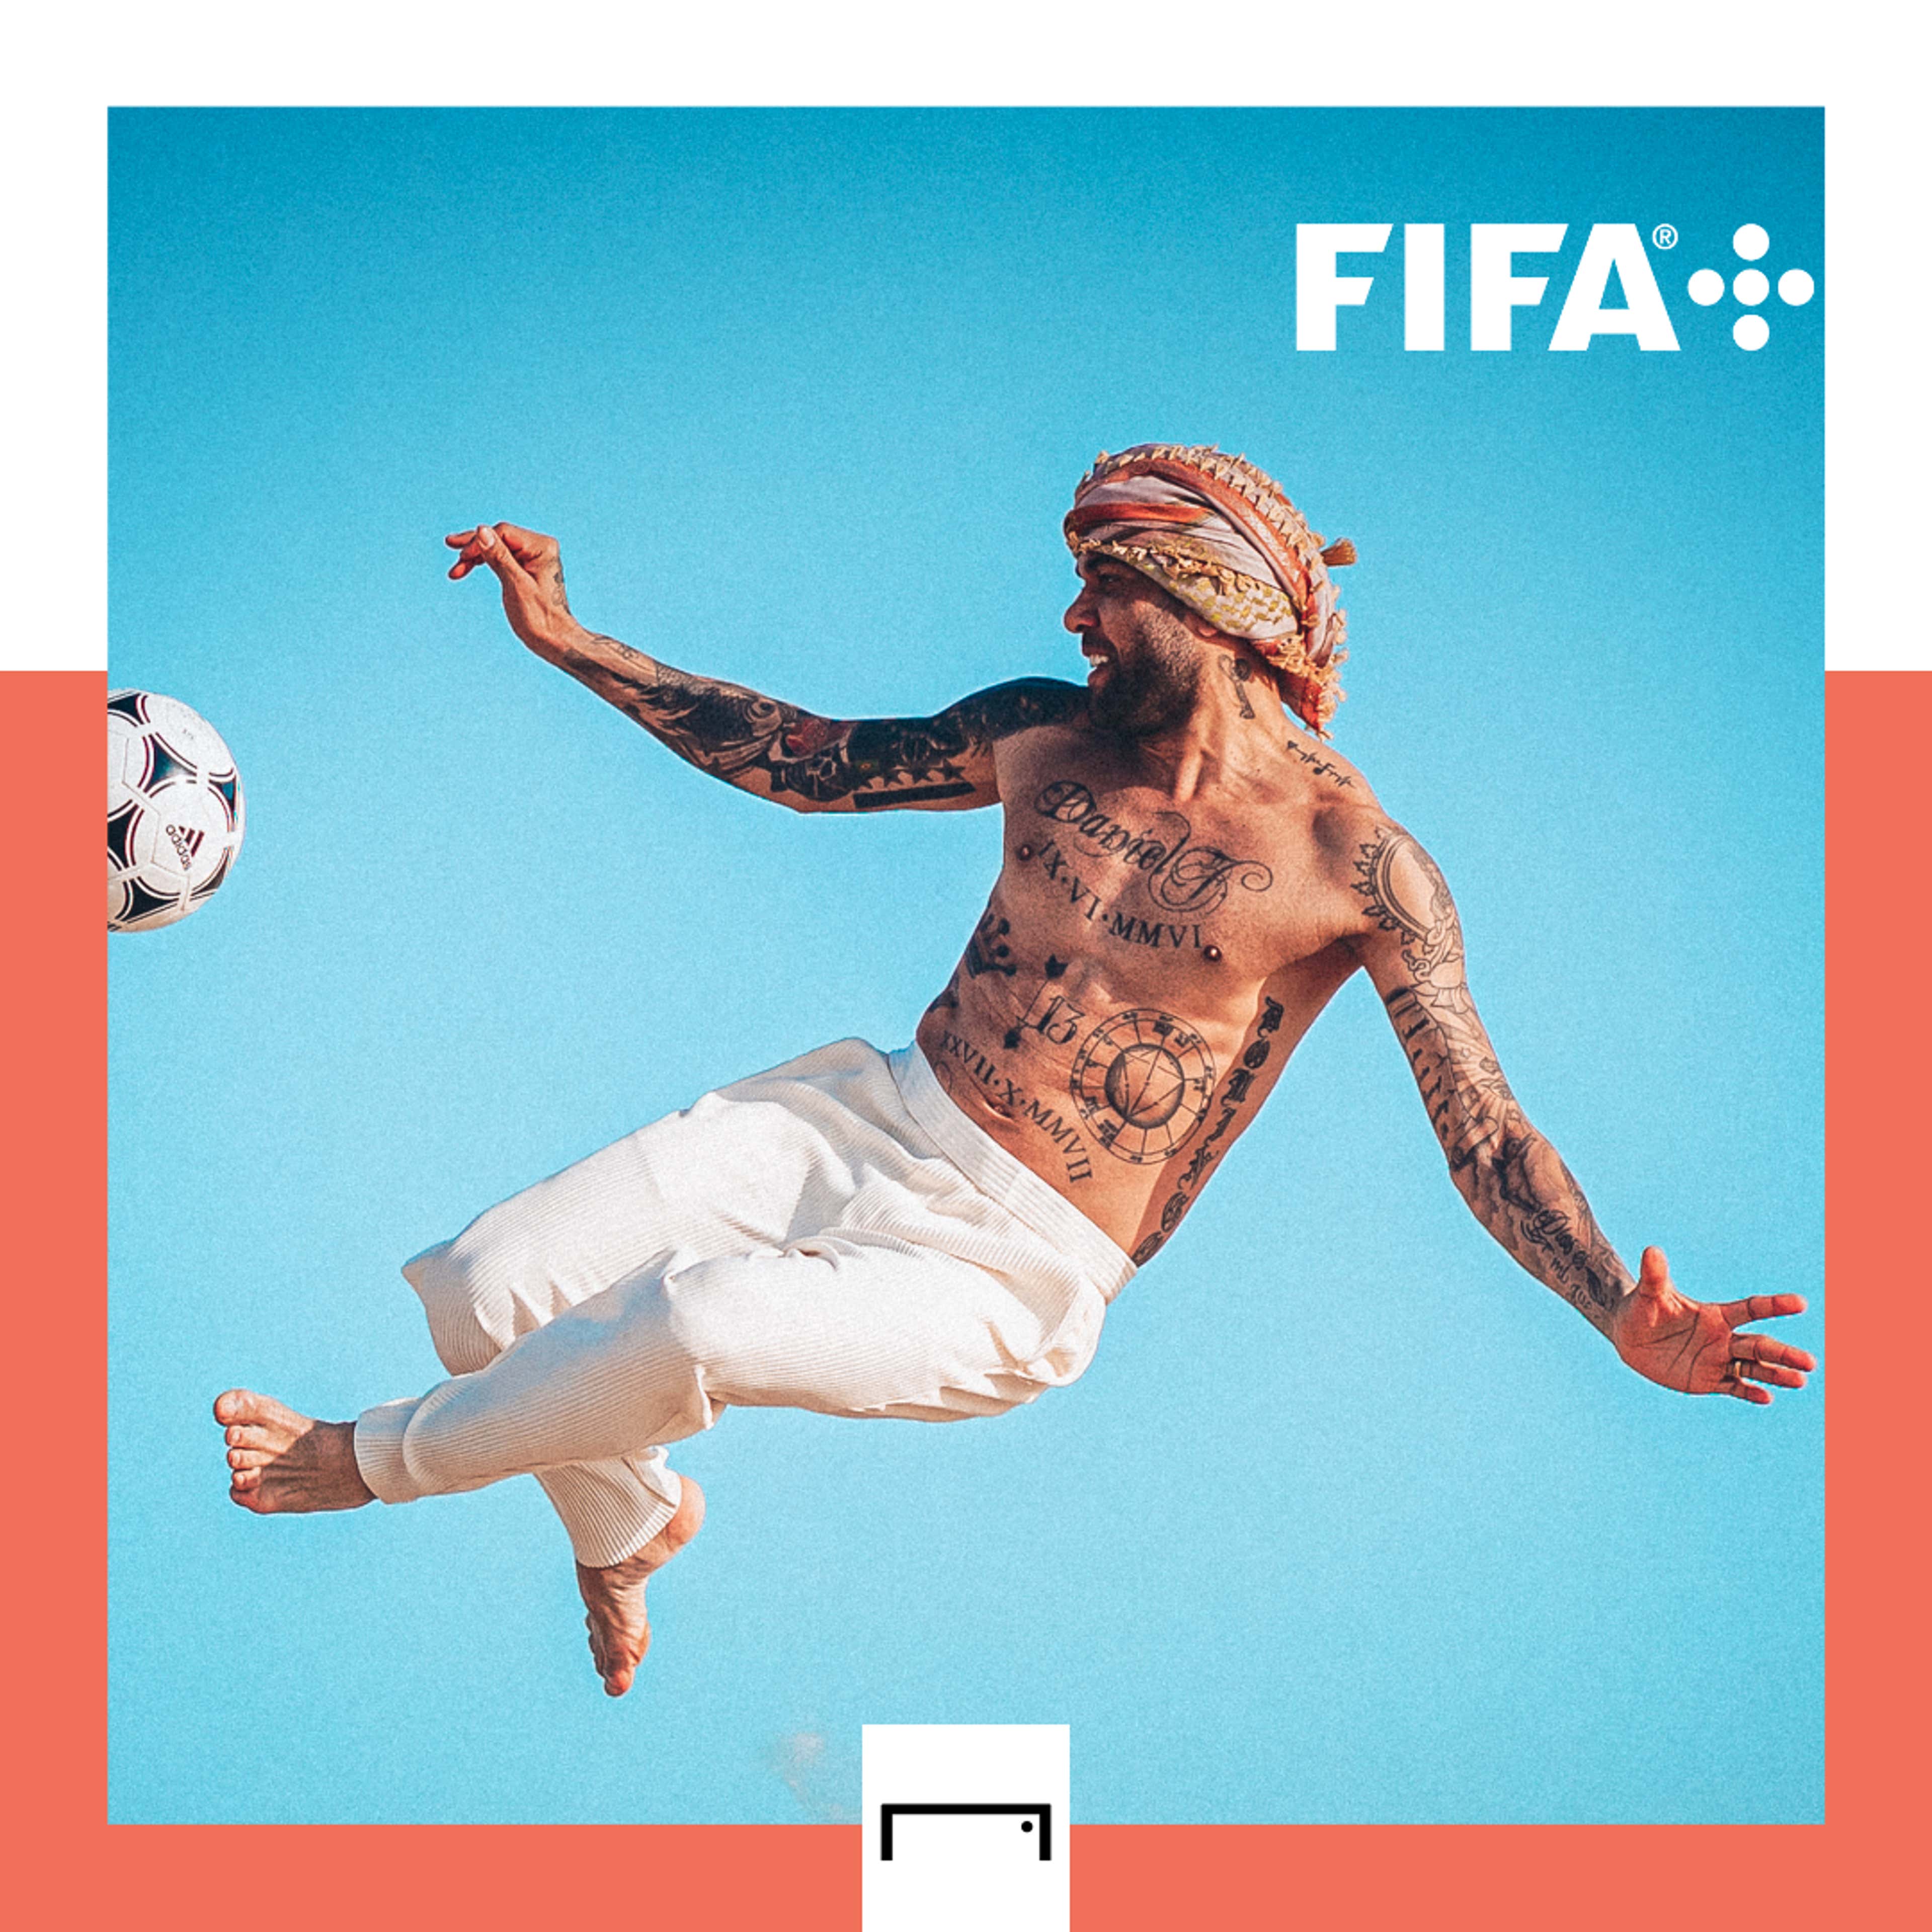 What is FIFA+ and is it free?